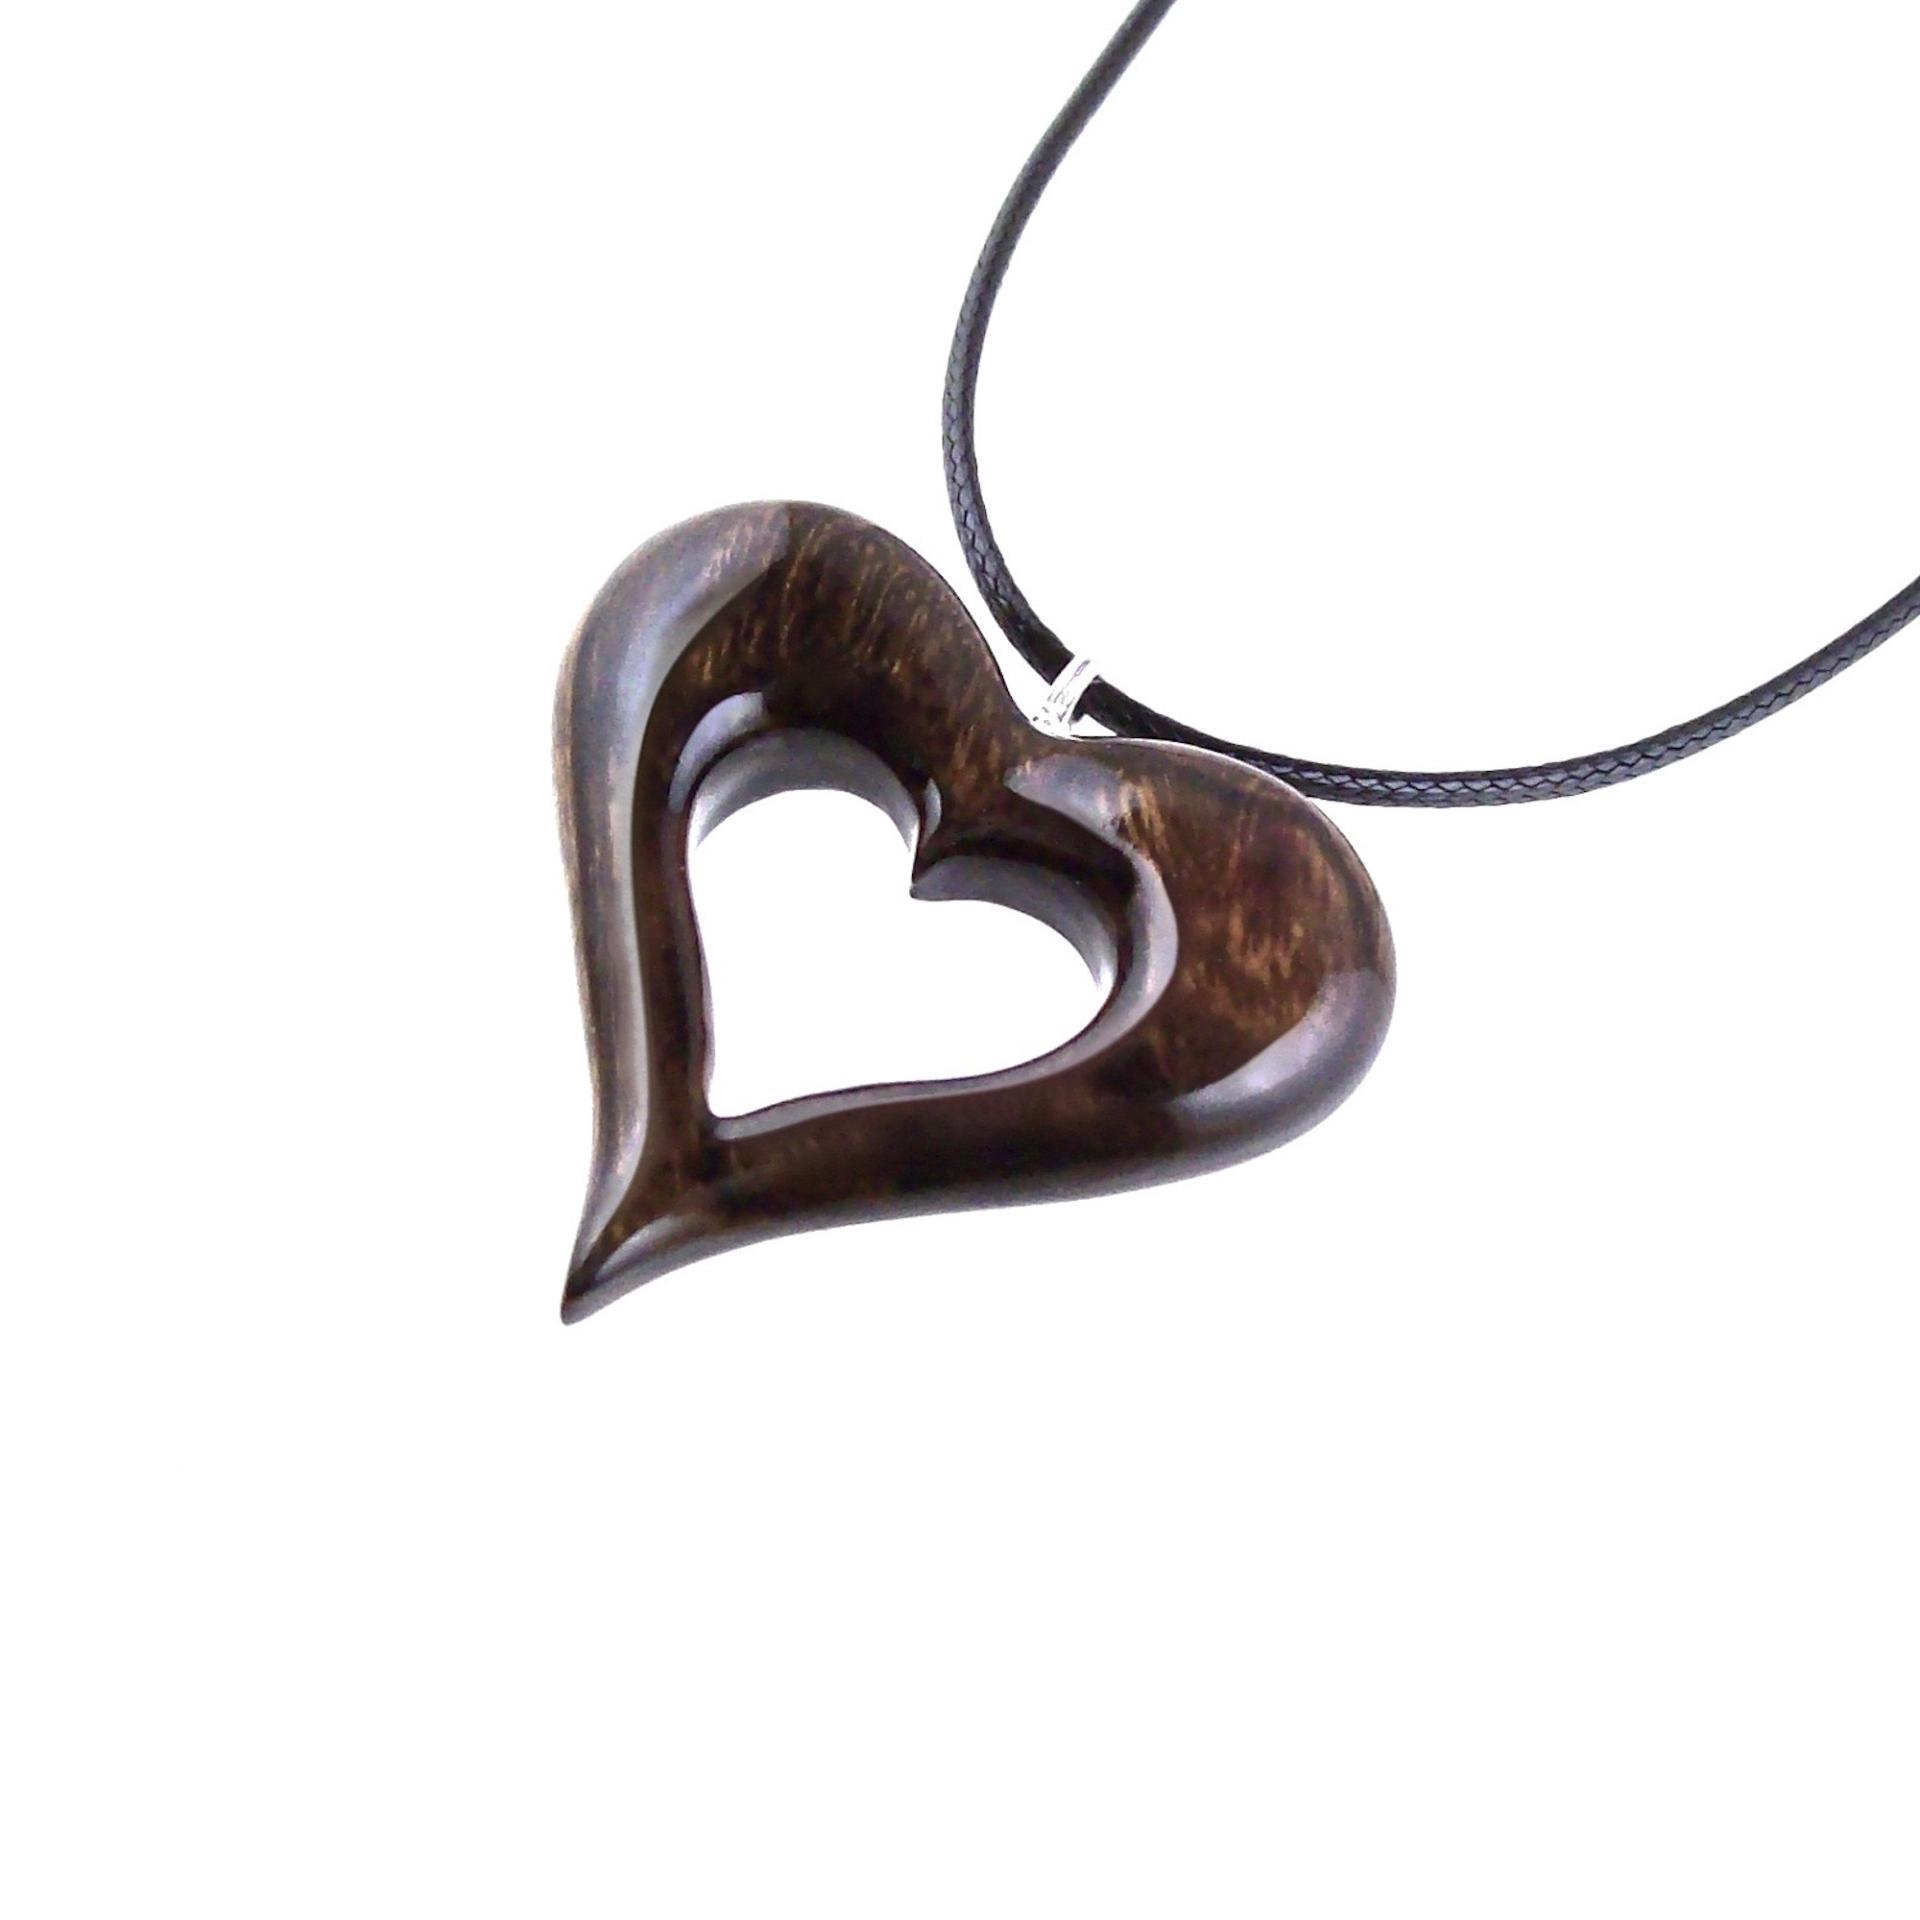 Wood Heart Necklace, Hand Carved Wooden Heart Pendant, 5th Anniversary Gift for Her, One of a Kind Wood Jewelry